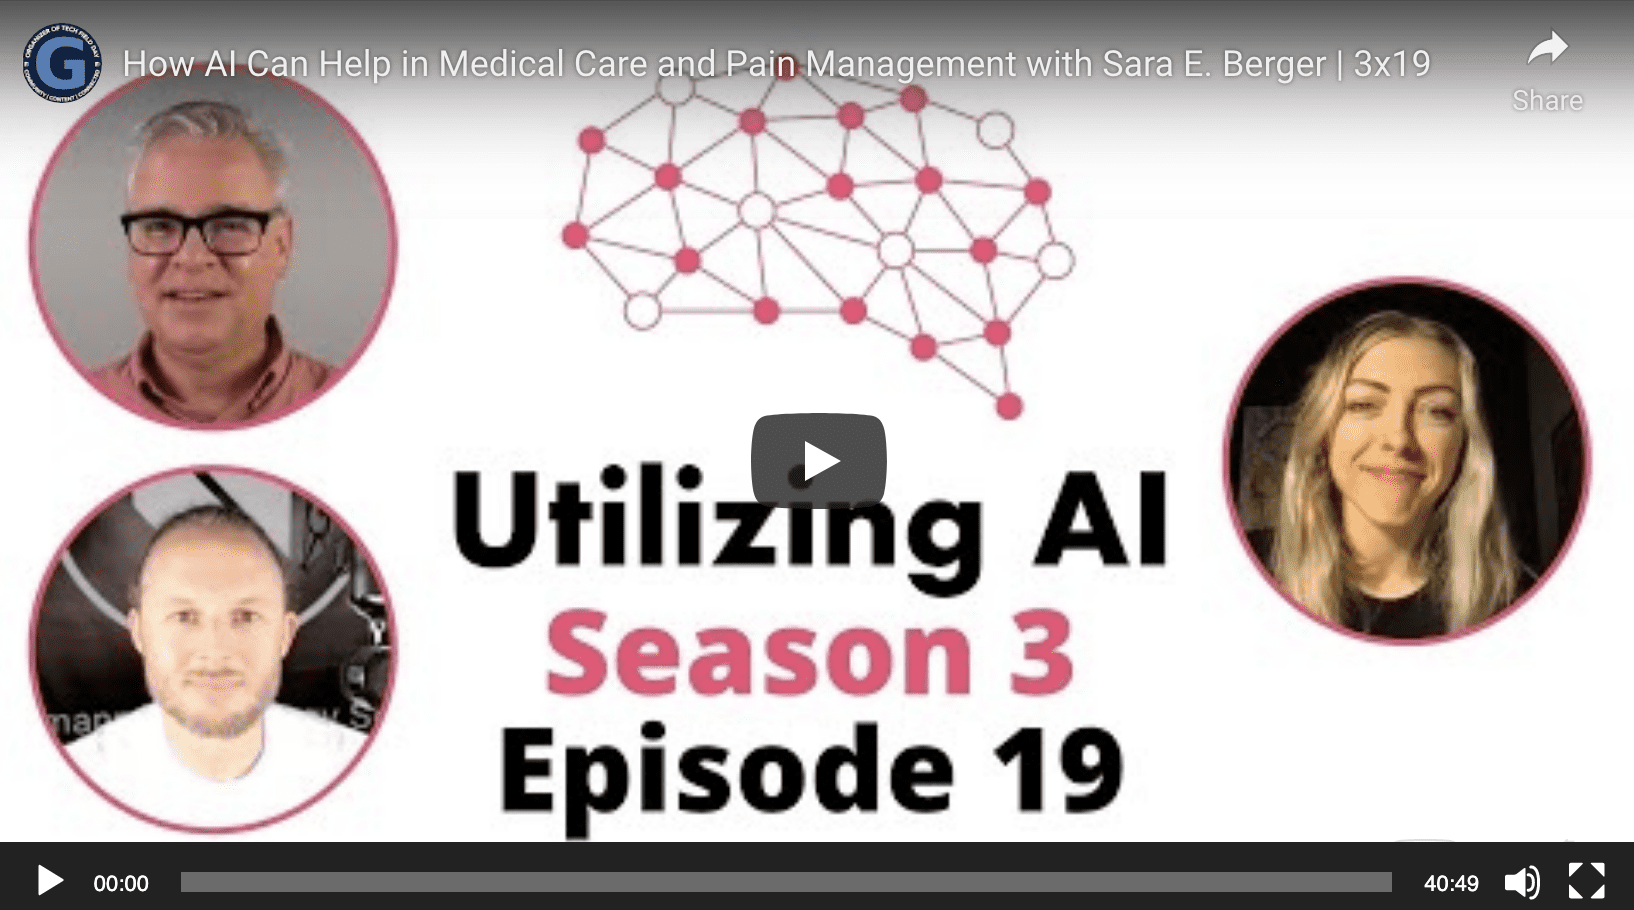 How AI Can Help in Medical Care and Pain Management with Sara E. Berger